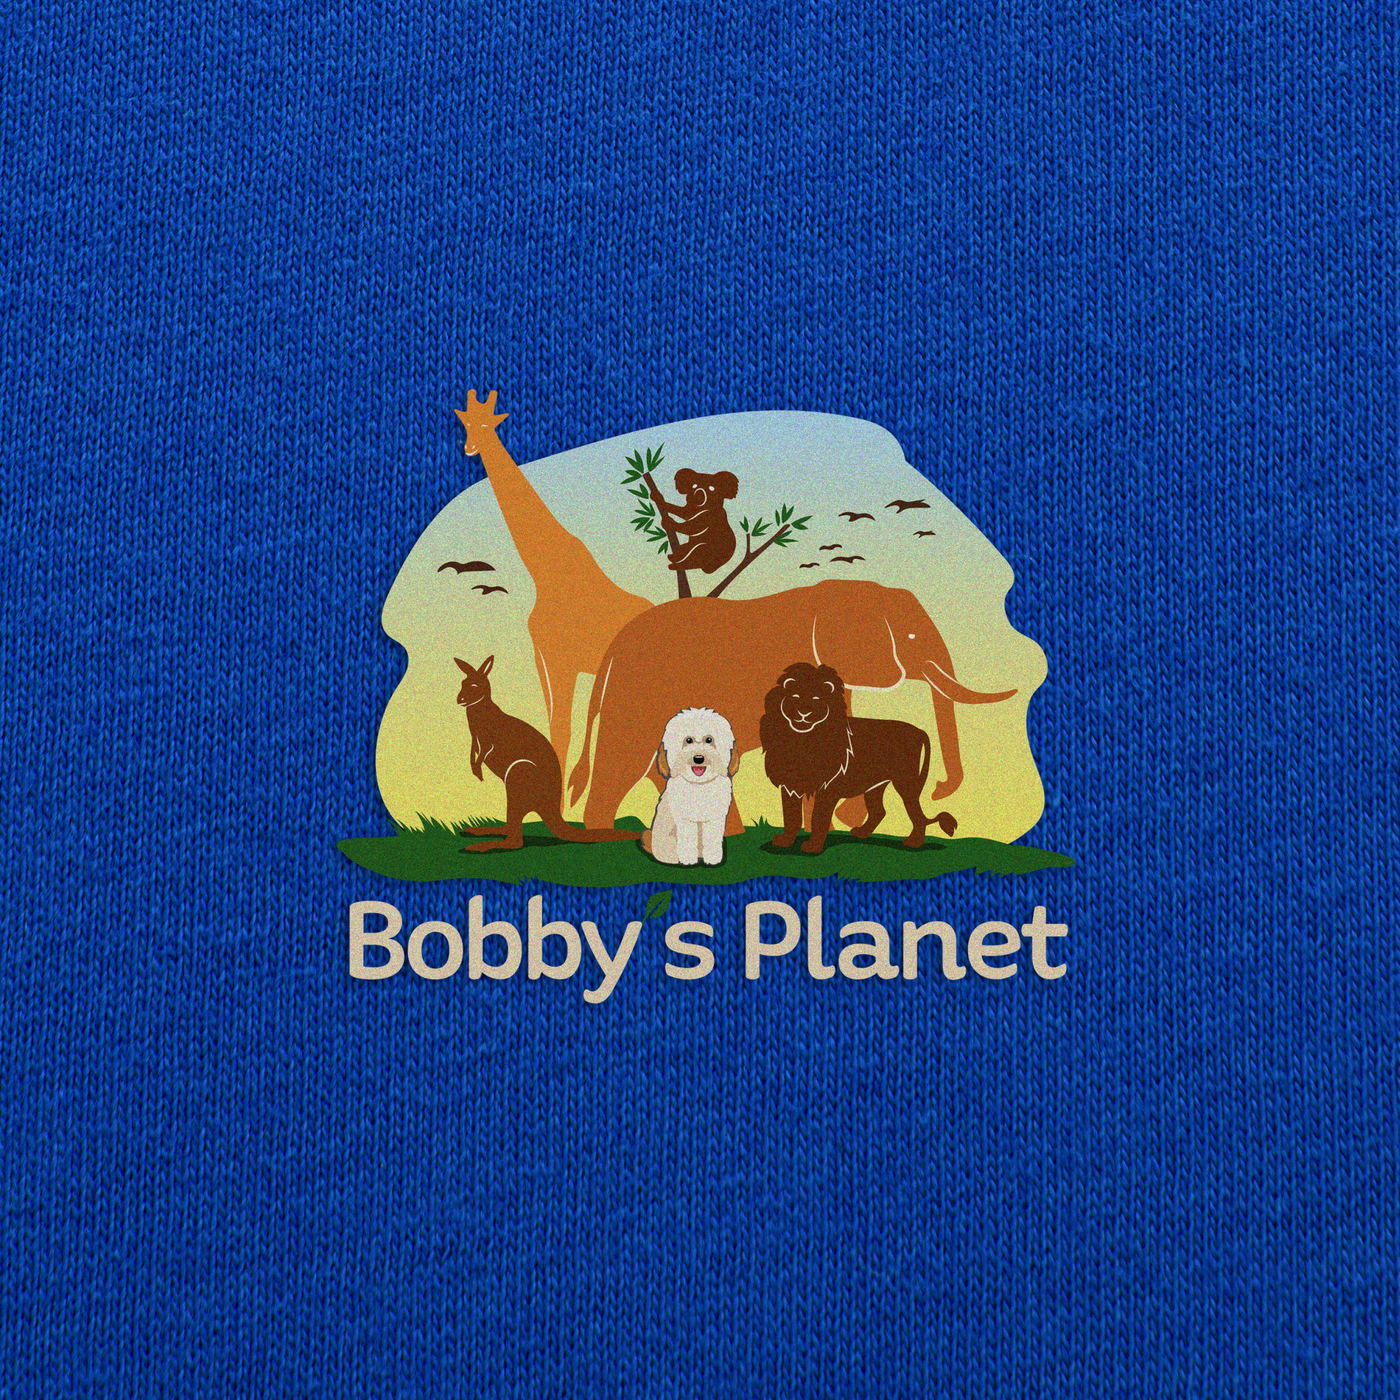 Bobby's Planet Kids Embroidered Poodle T-Shirt from Bobbys Planet Toy Poodle Collection in True Royal Color#color_true-royal